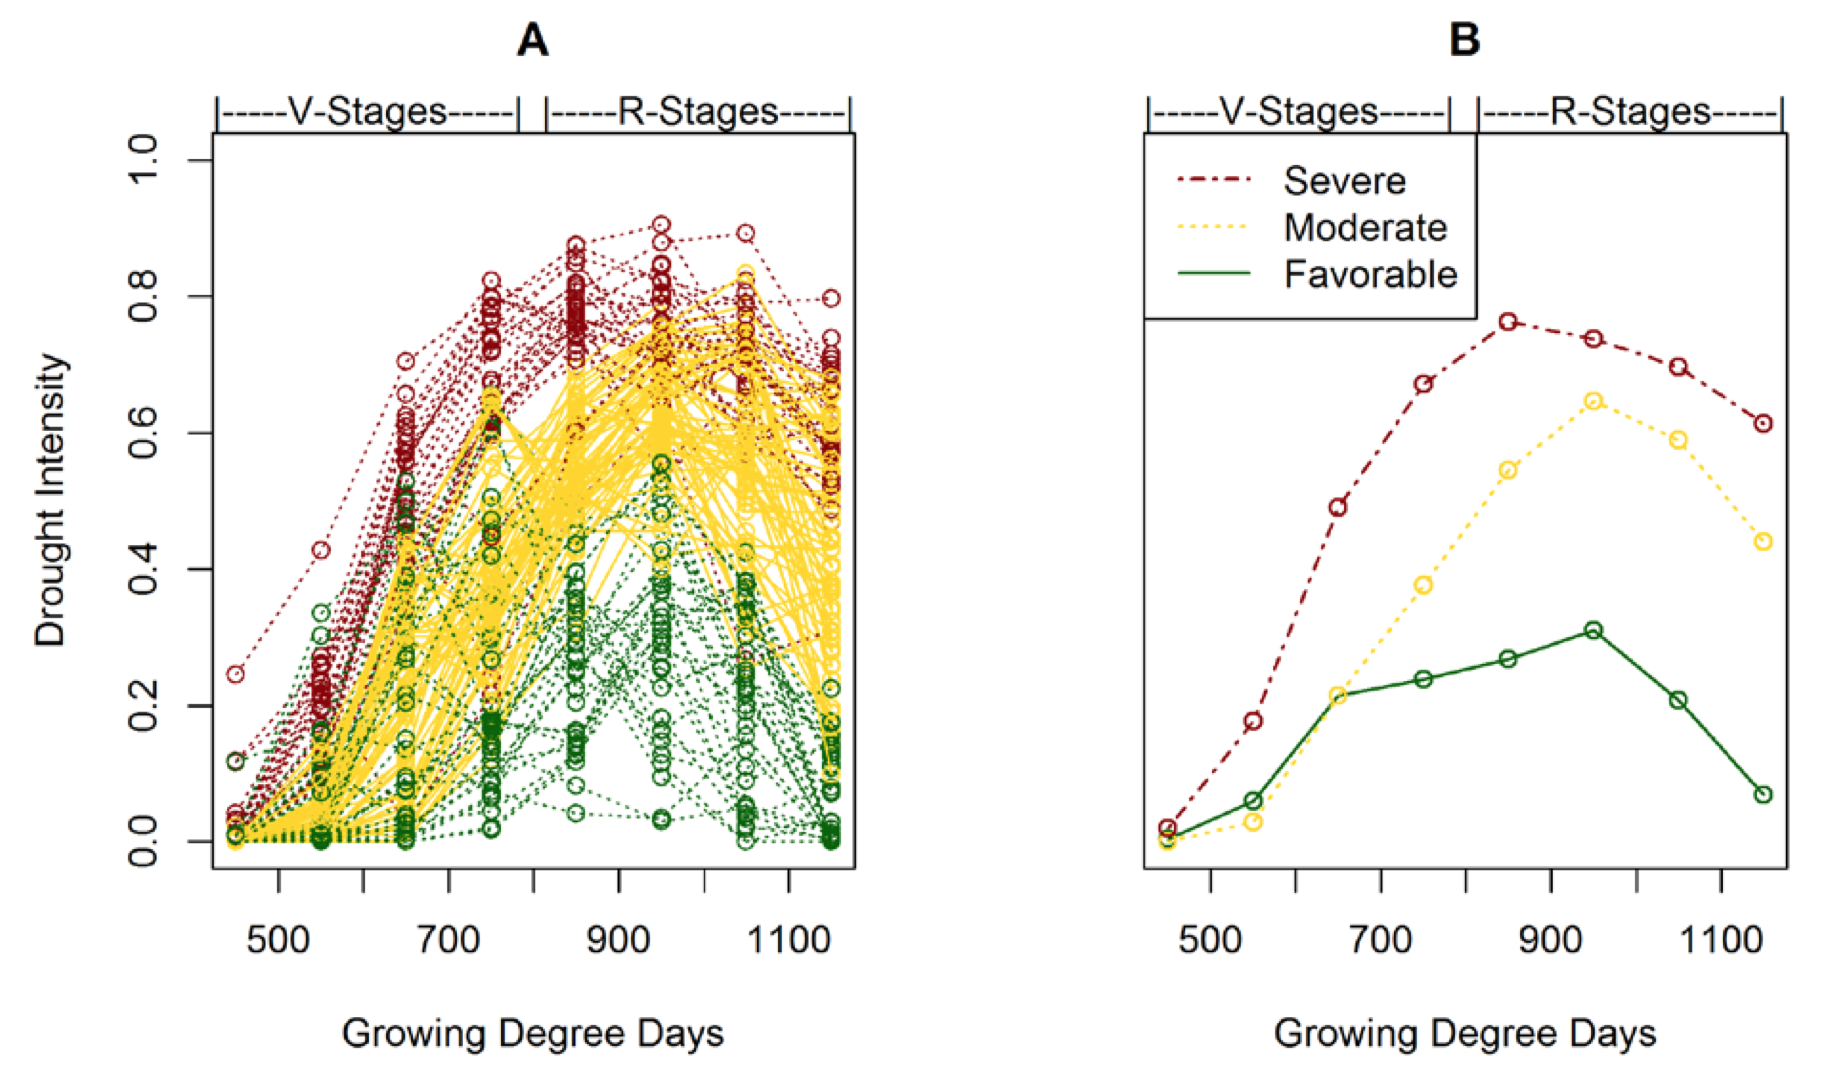 Individual drought simulations, and typical drought patterns derived from clustering techniques in both vegetative (V) stages and reproductive (R) stages.